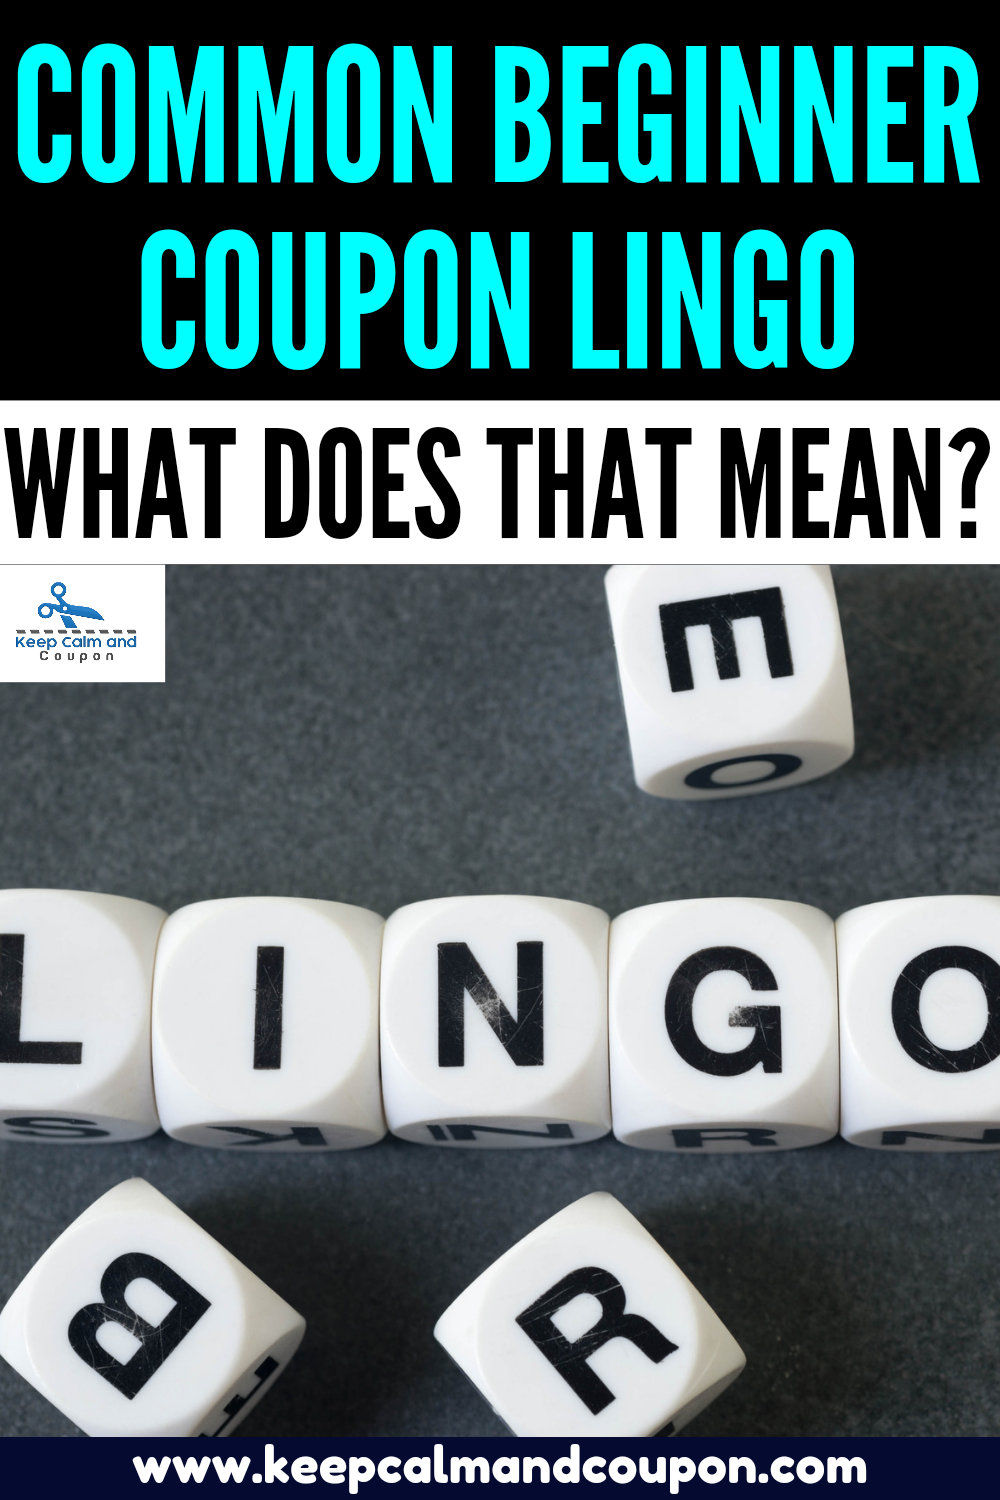 Common Beginner Coupon Lingo - What Does That Mean?